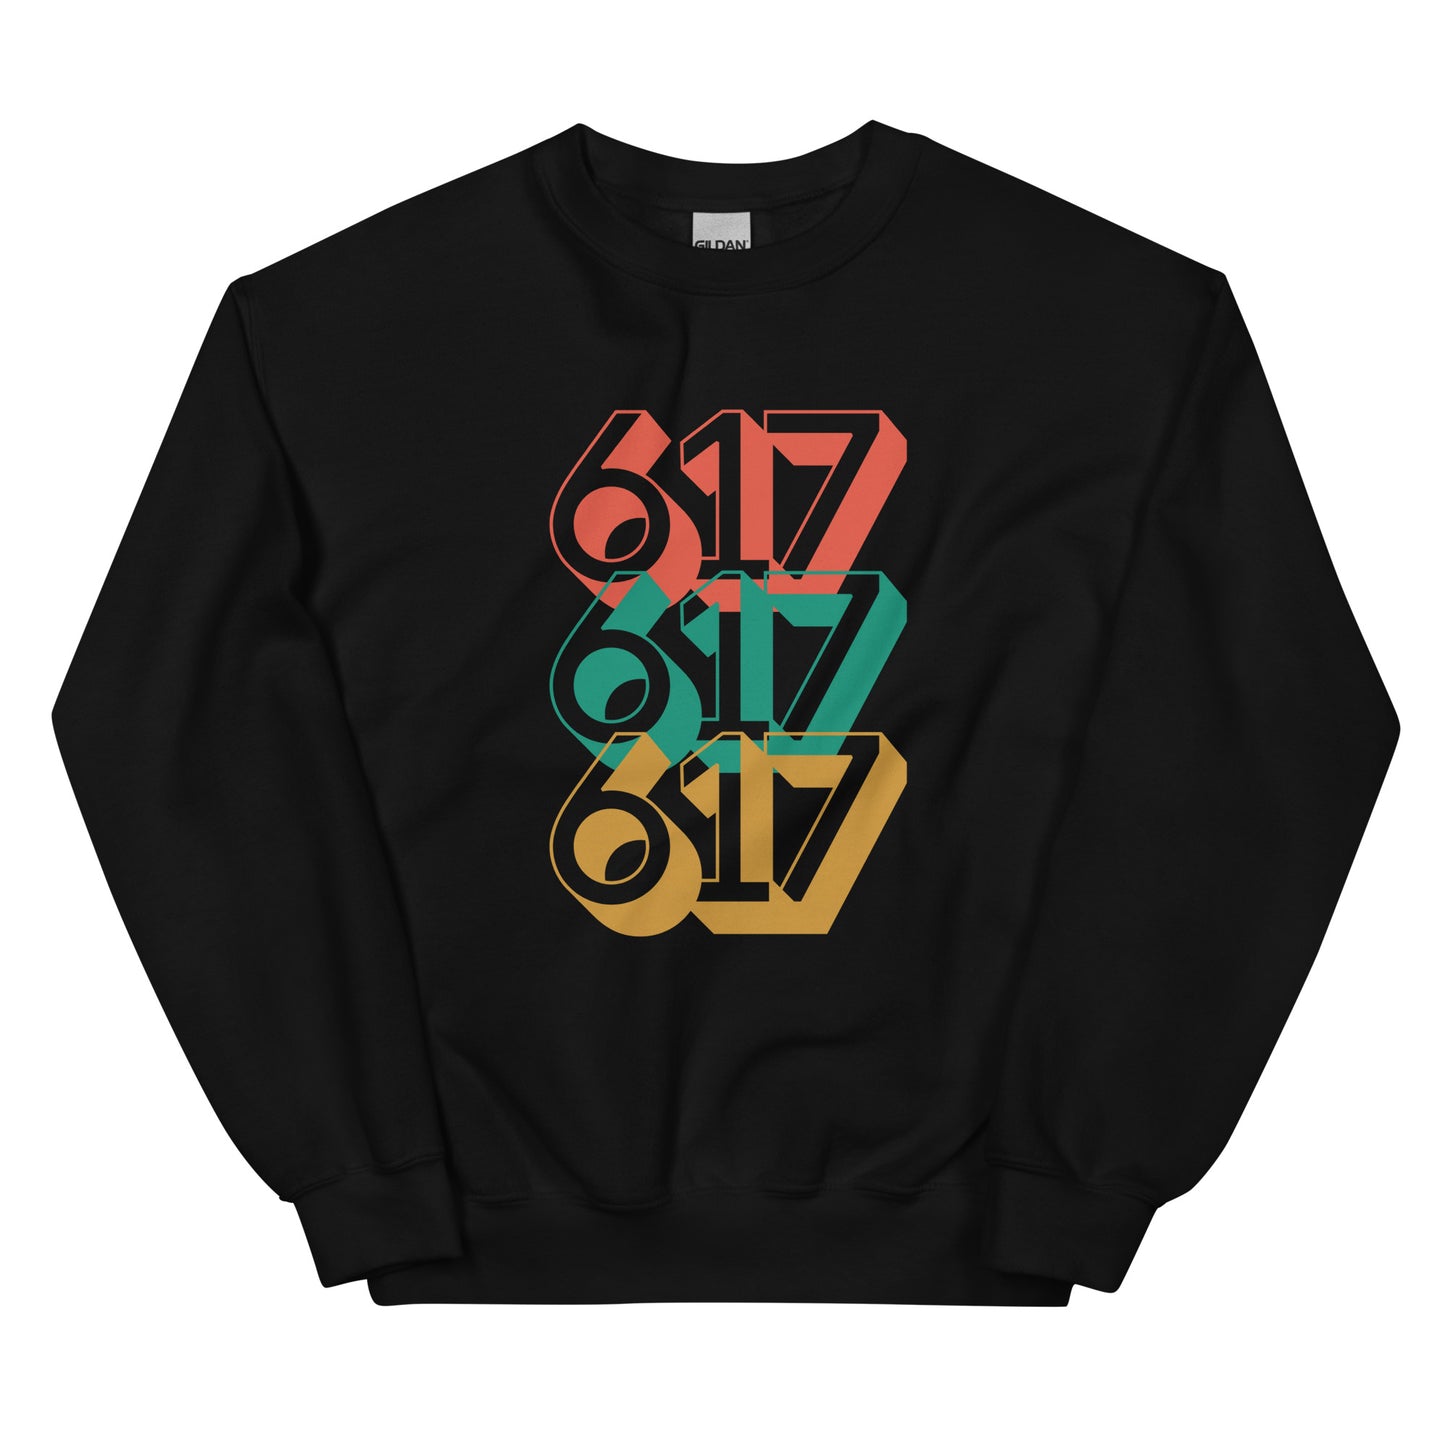 black crewneck with three 617s in red green and yellow